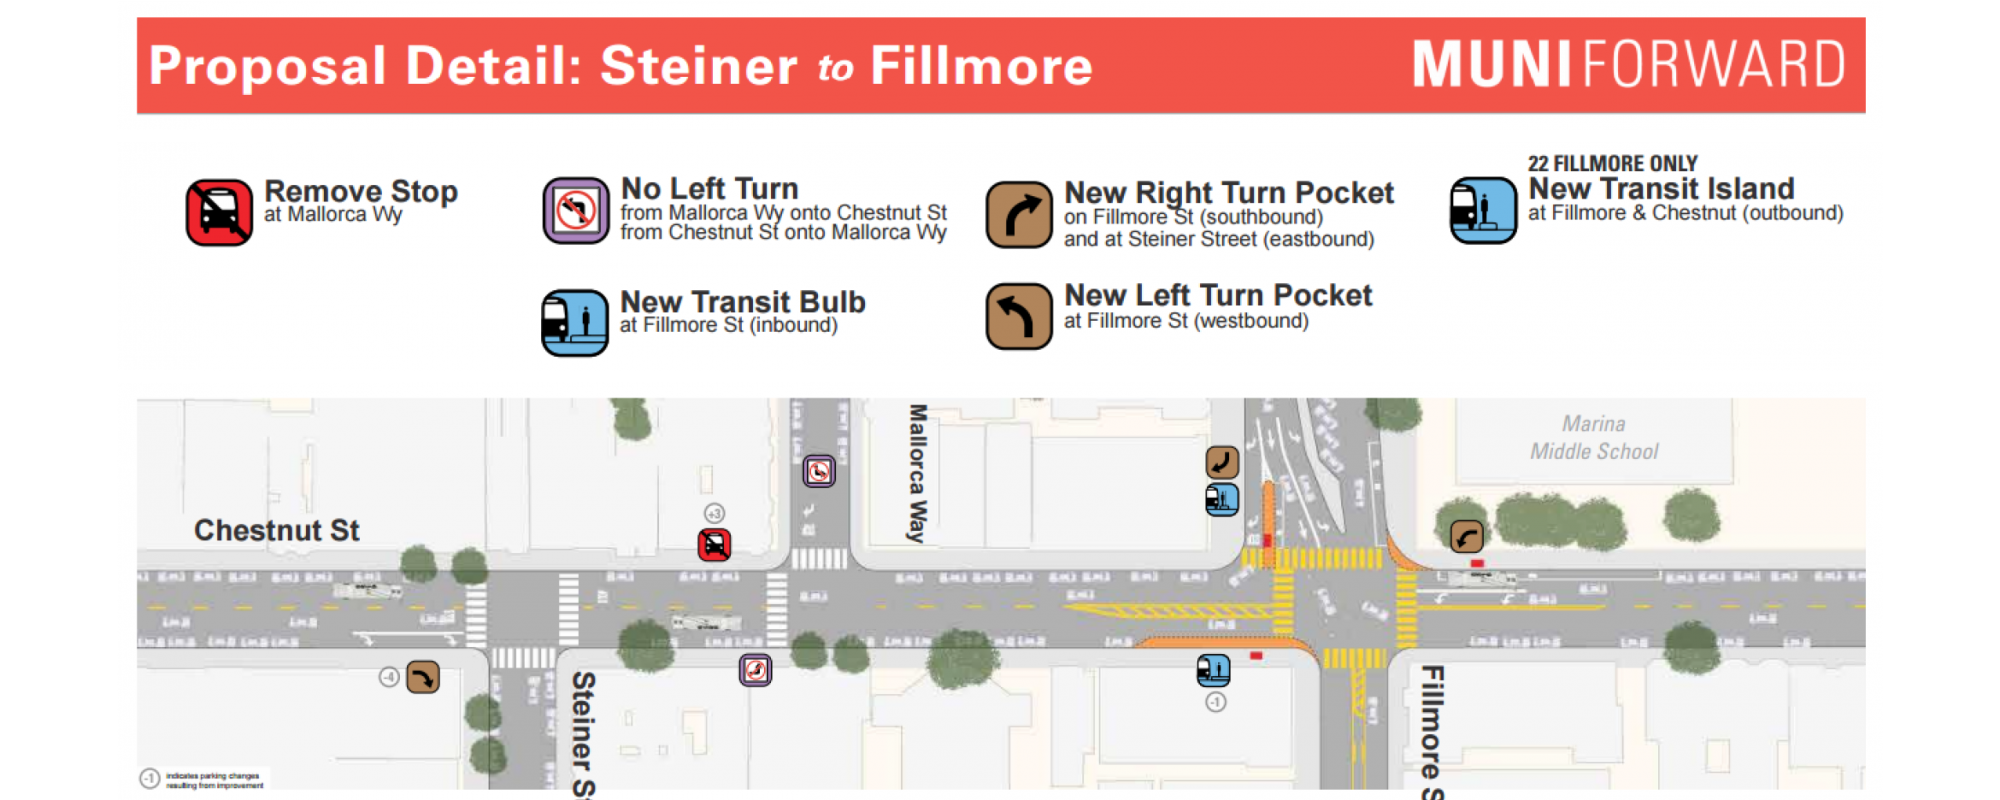 Proposed Detail: Steiner to Fillmore